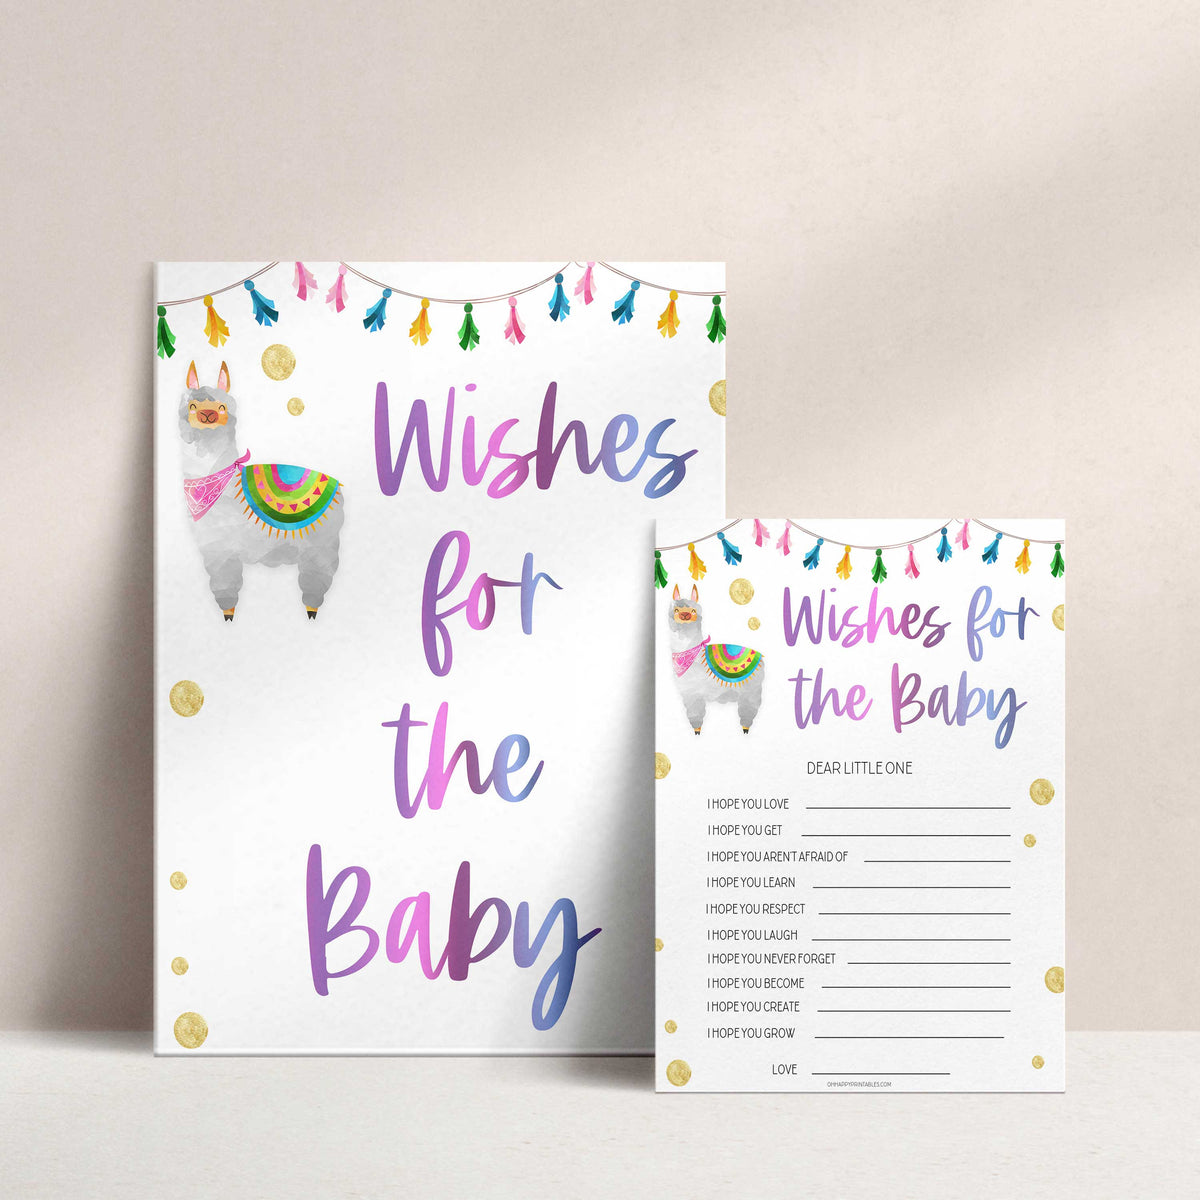 wishes for the baby game, Printable baby shower games, llama fiesta fun baby games, baby shower games, fun baby shower ideas, top baby shower ideas, Llama fiesta shower baby shower, fiesta baby shower ideas